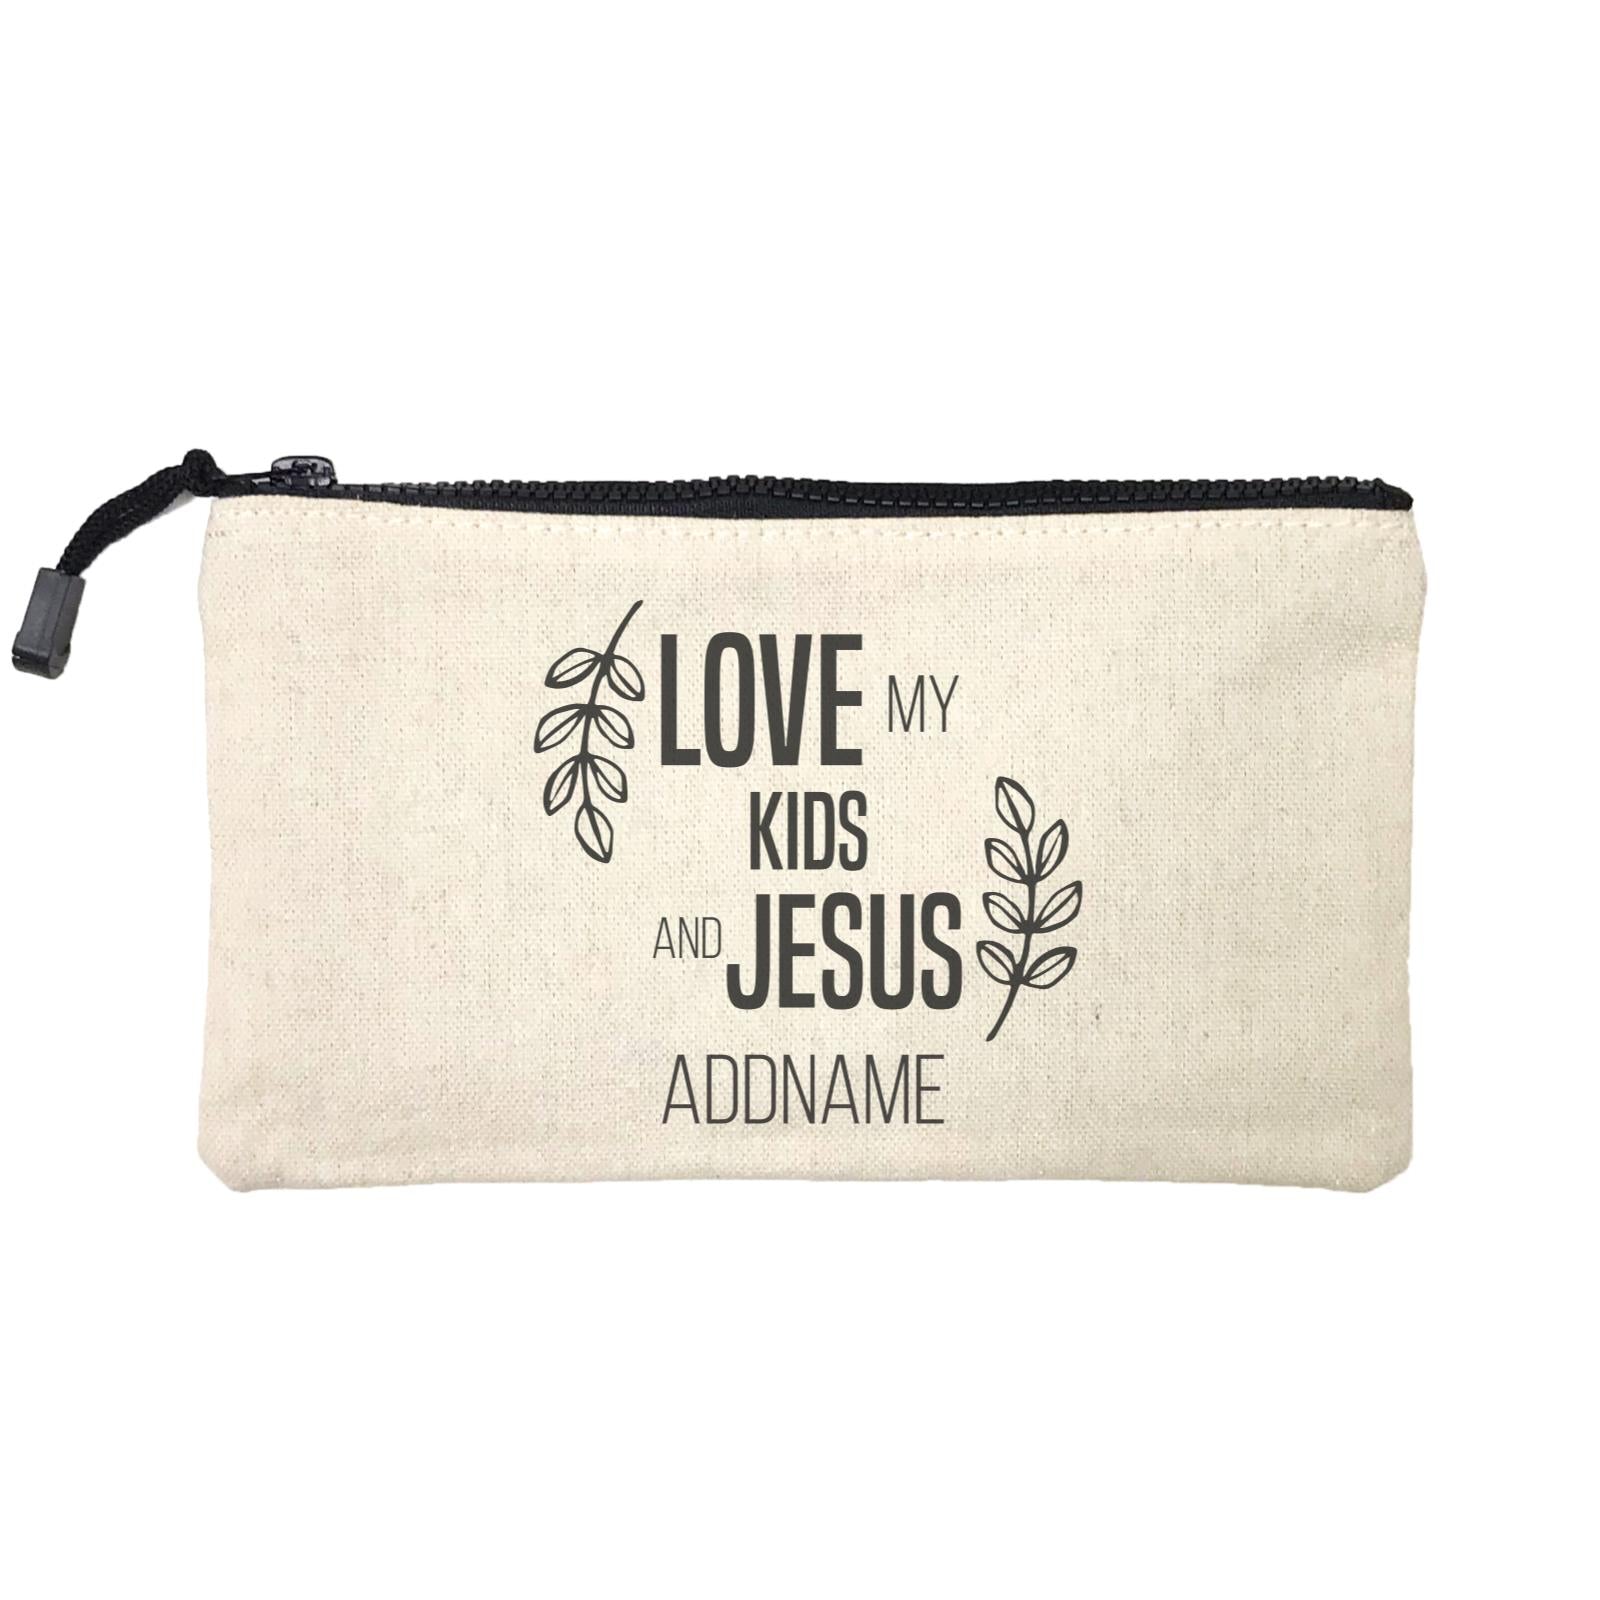 Christian Series Love My Kids And Jesus Addname Mini Accessories Stationery Pouch